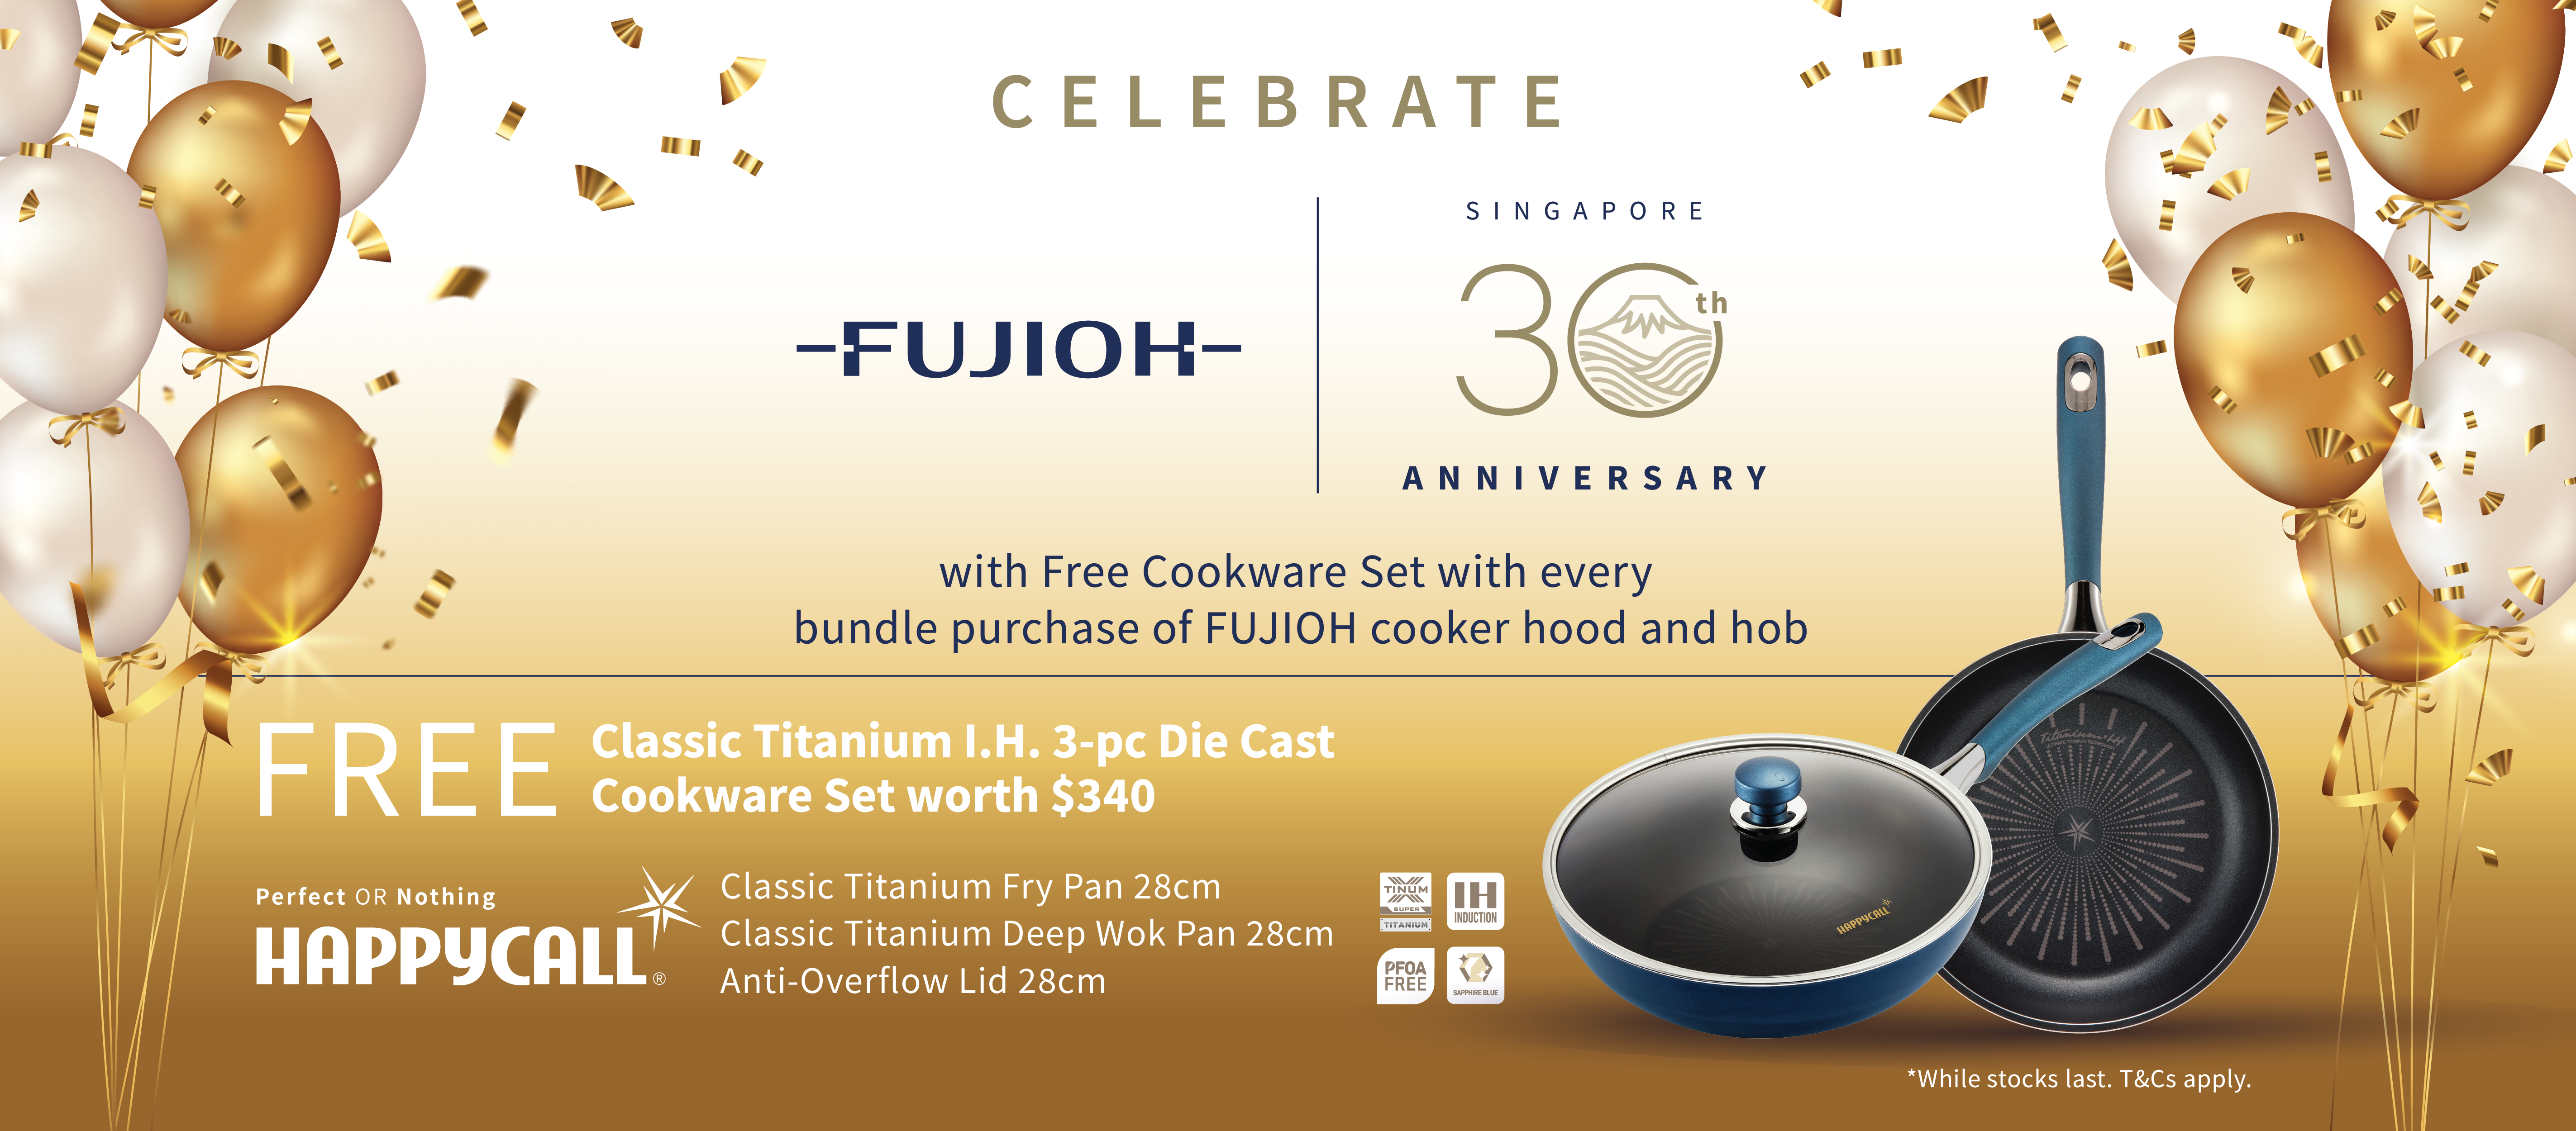 FUJIOH FREE HAPPYCALL COOKWARE SET PROMOTION